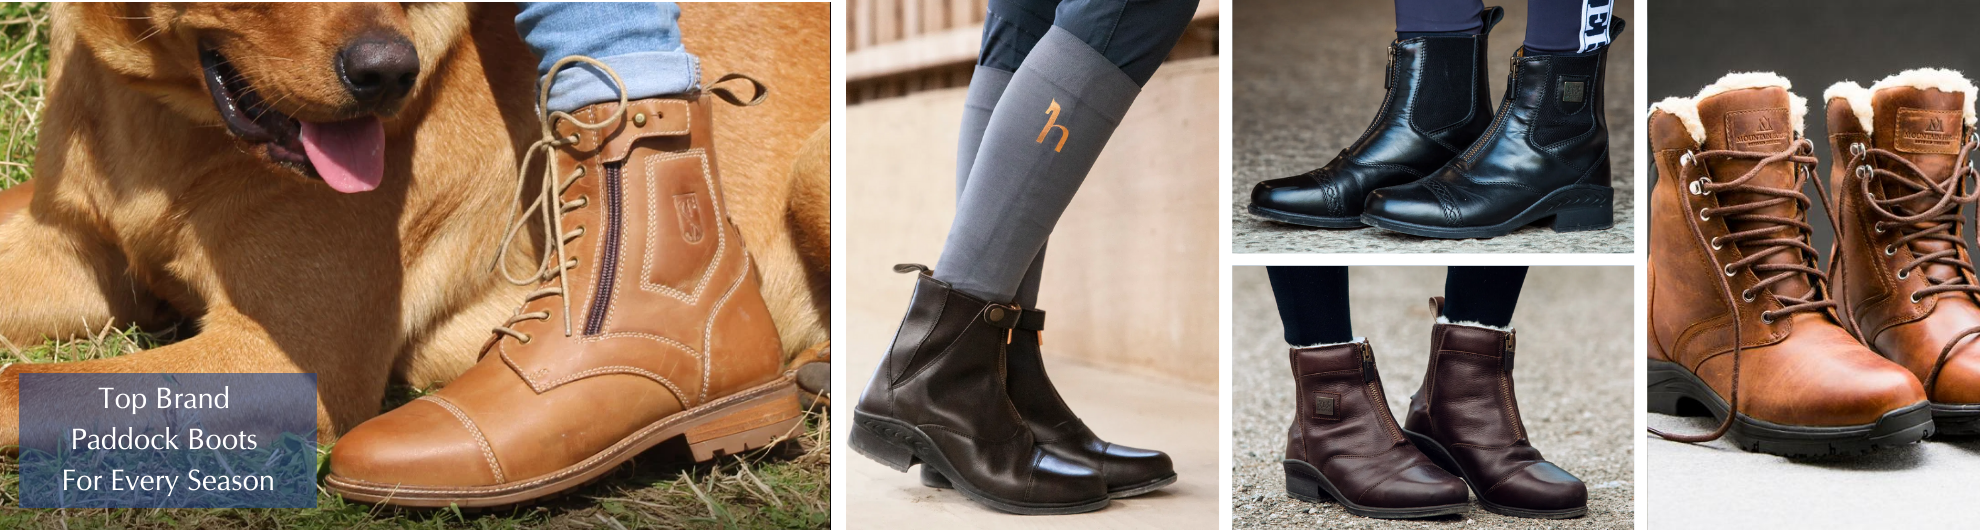 Top Brand Paddock Boots for All Seasons